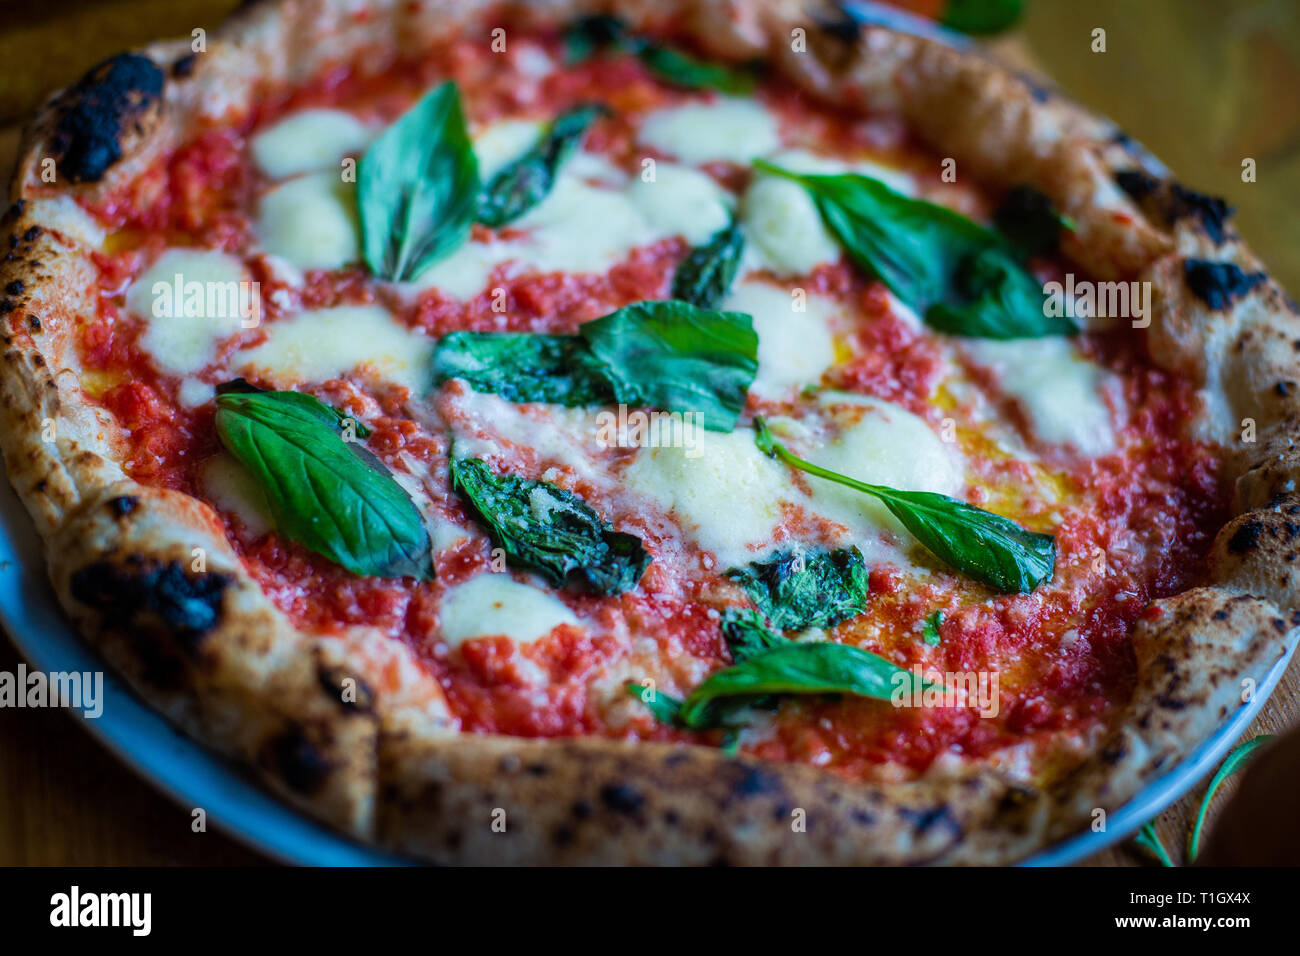 traditional authentic neapolitan style wood fired pizza on table in a pizzeria trattoria restaurant Stock Photo